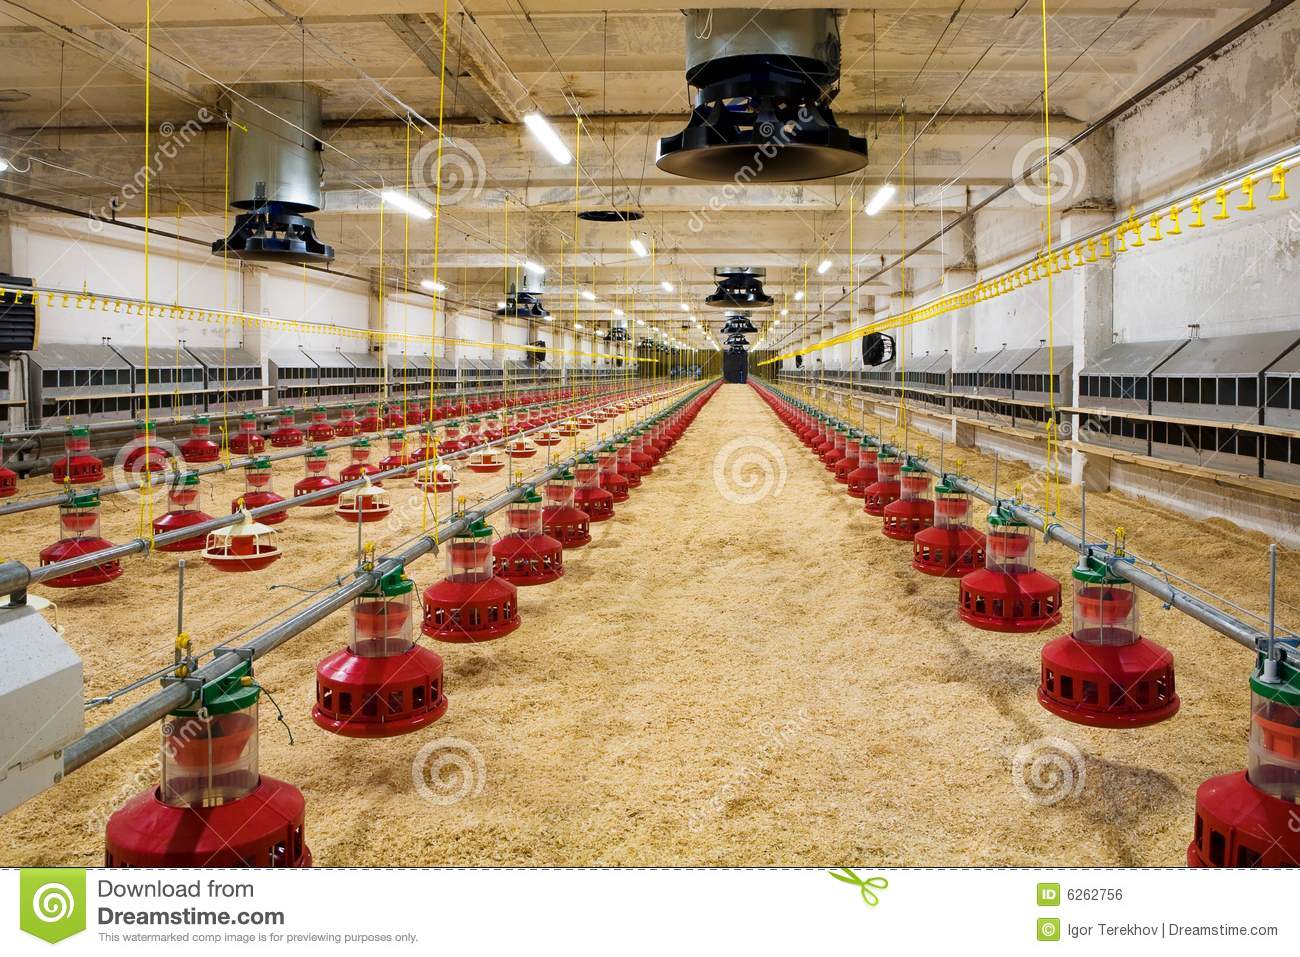 Poultry Farm Royalty Free Stock Image   Image  6262756